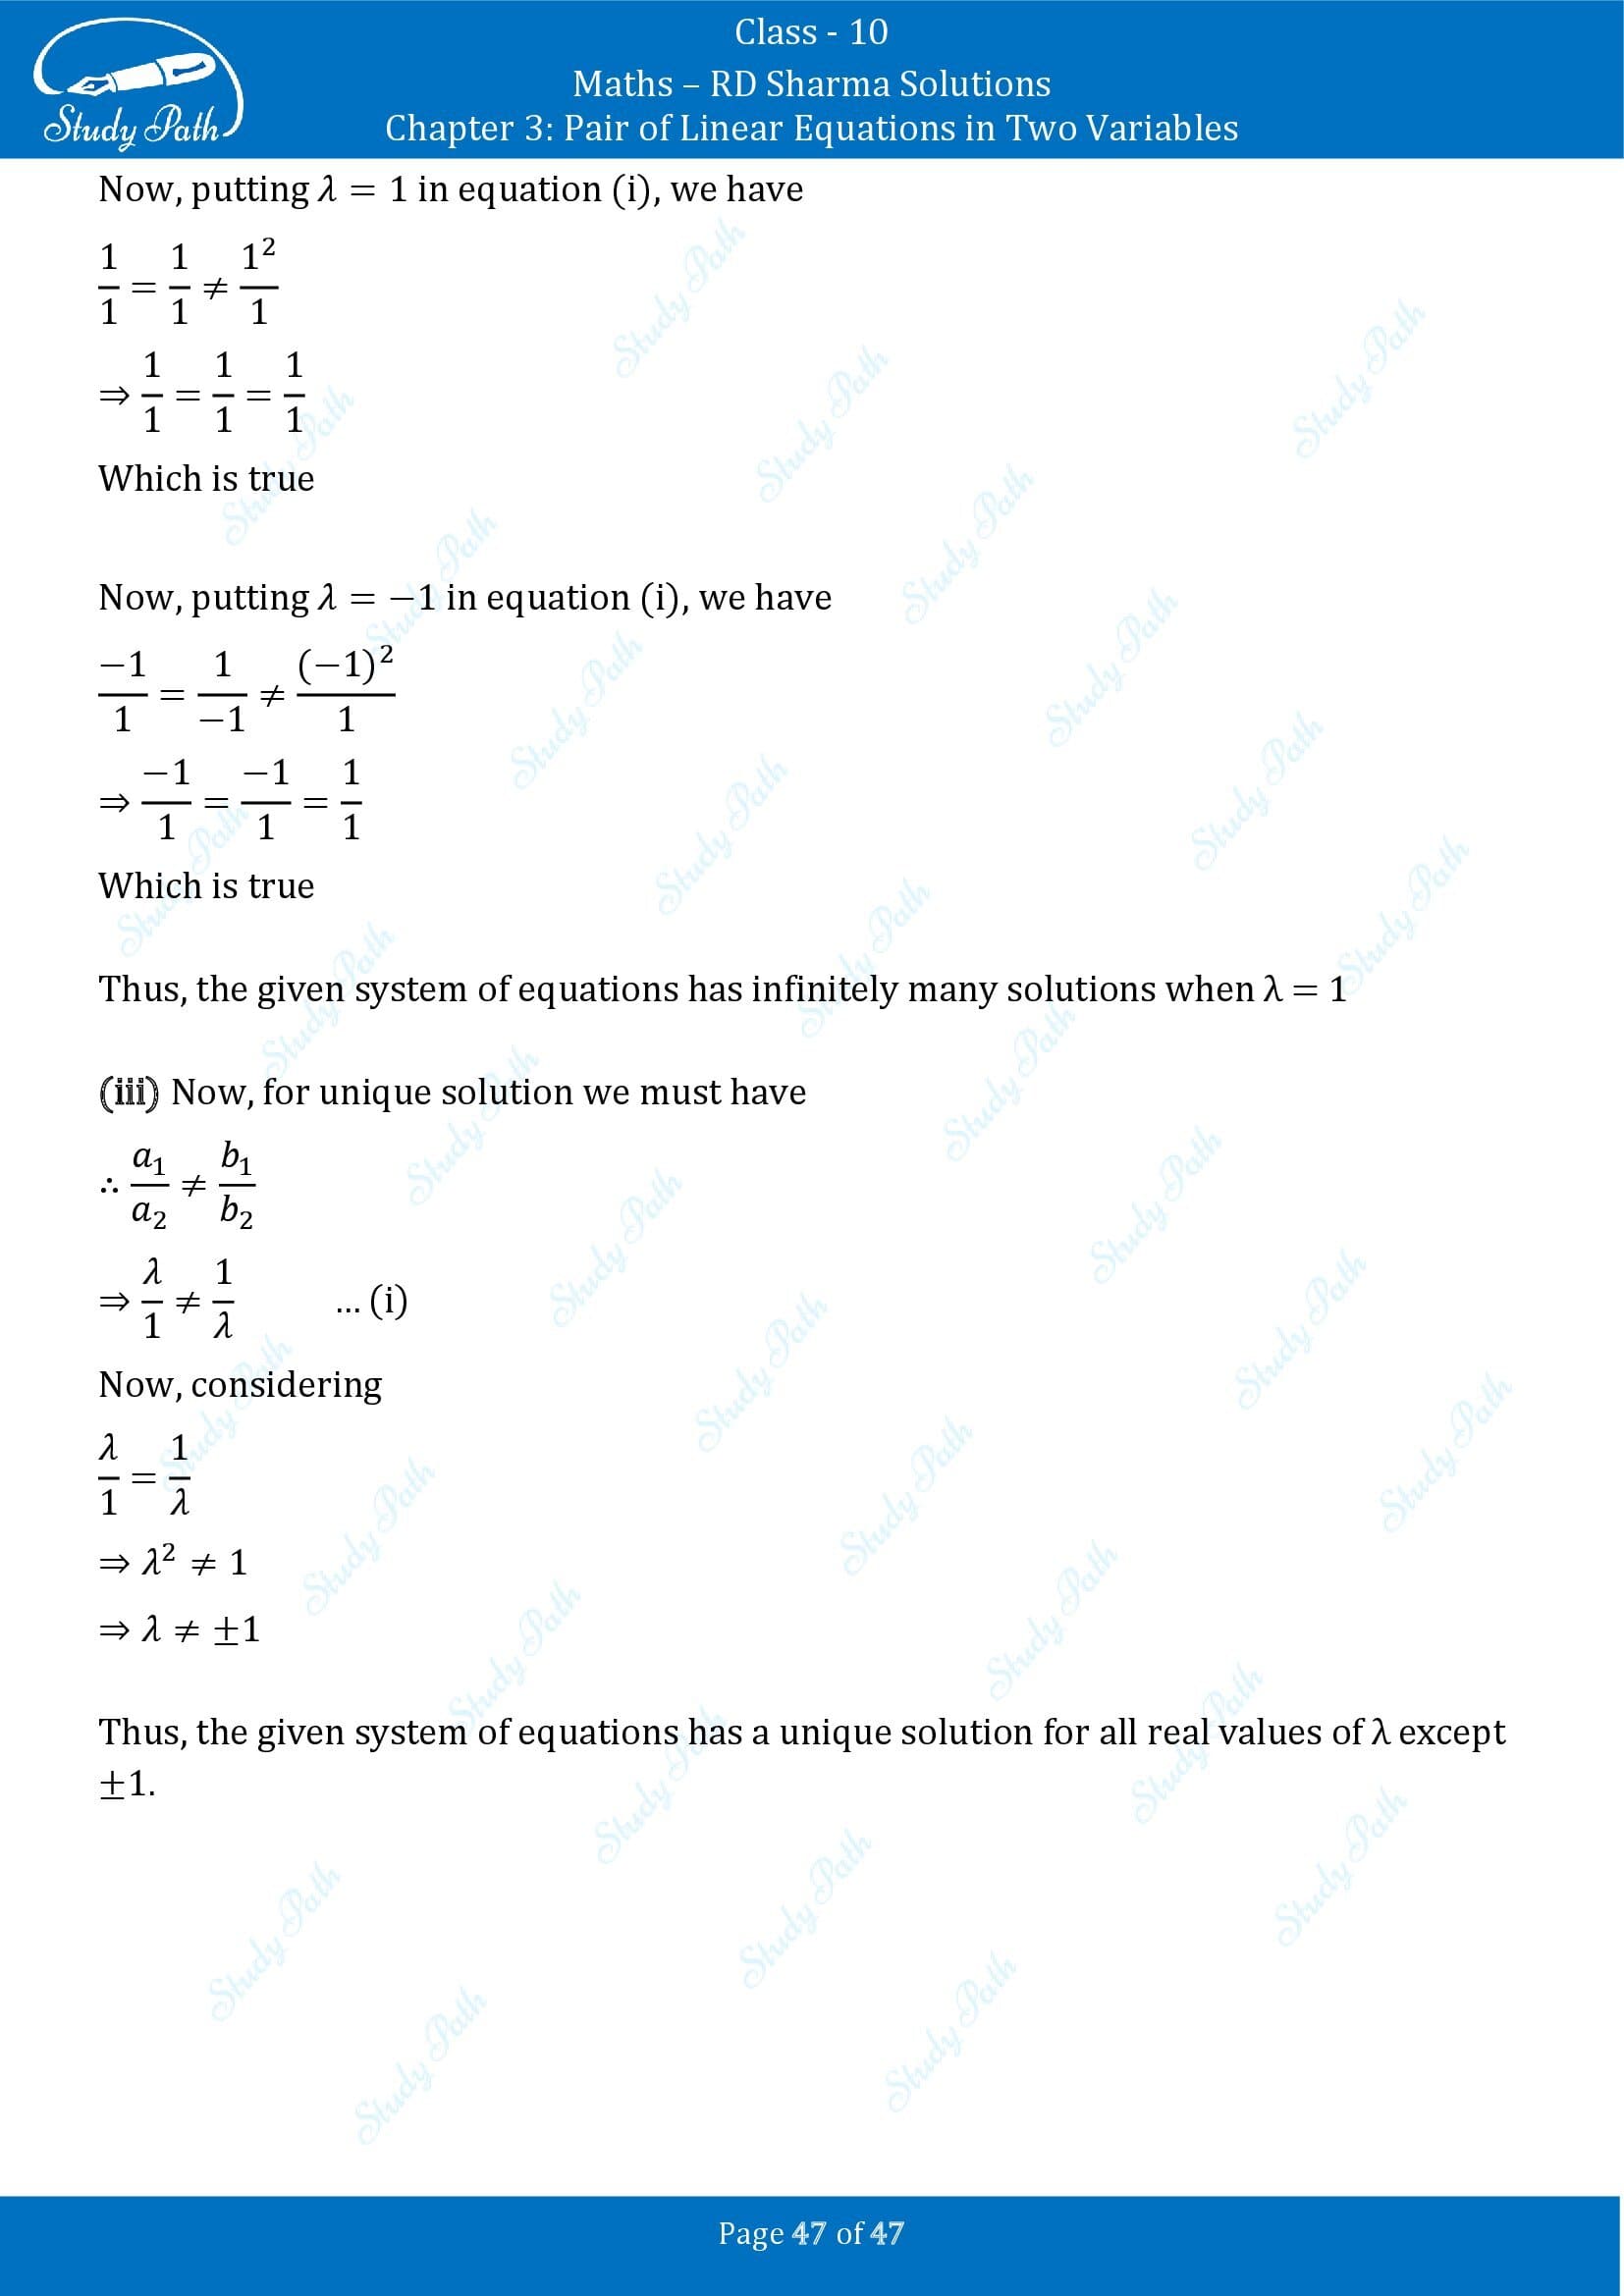 RD Sharma Solutions Class 10 Chapter 3 Pair of Linear Equations in Two Variables Exercise 3.5 00047